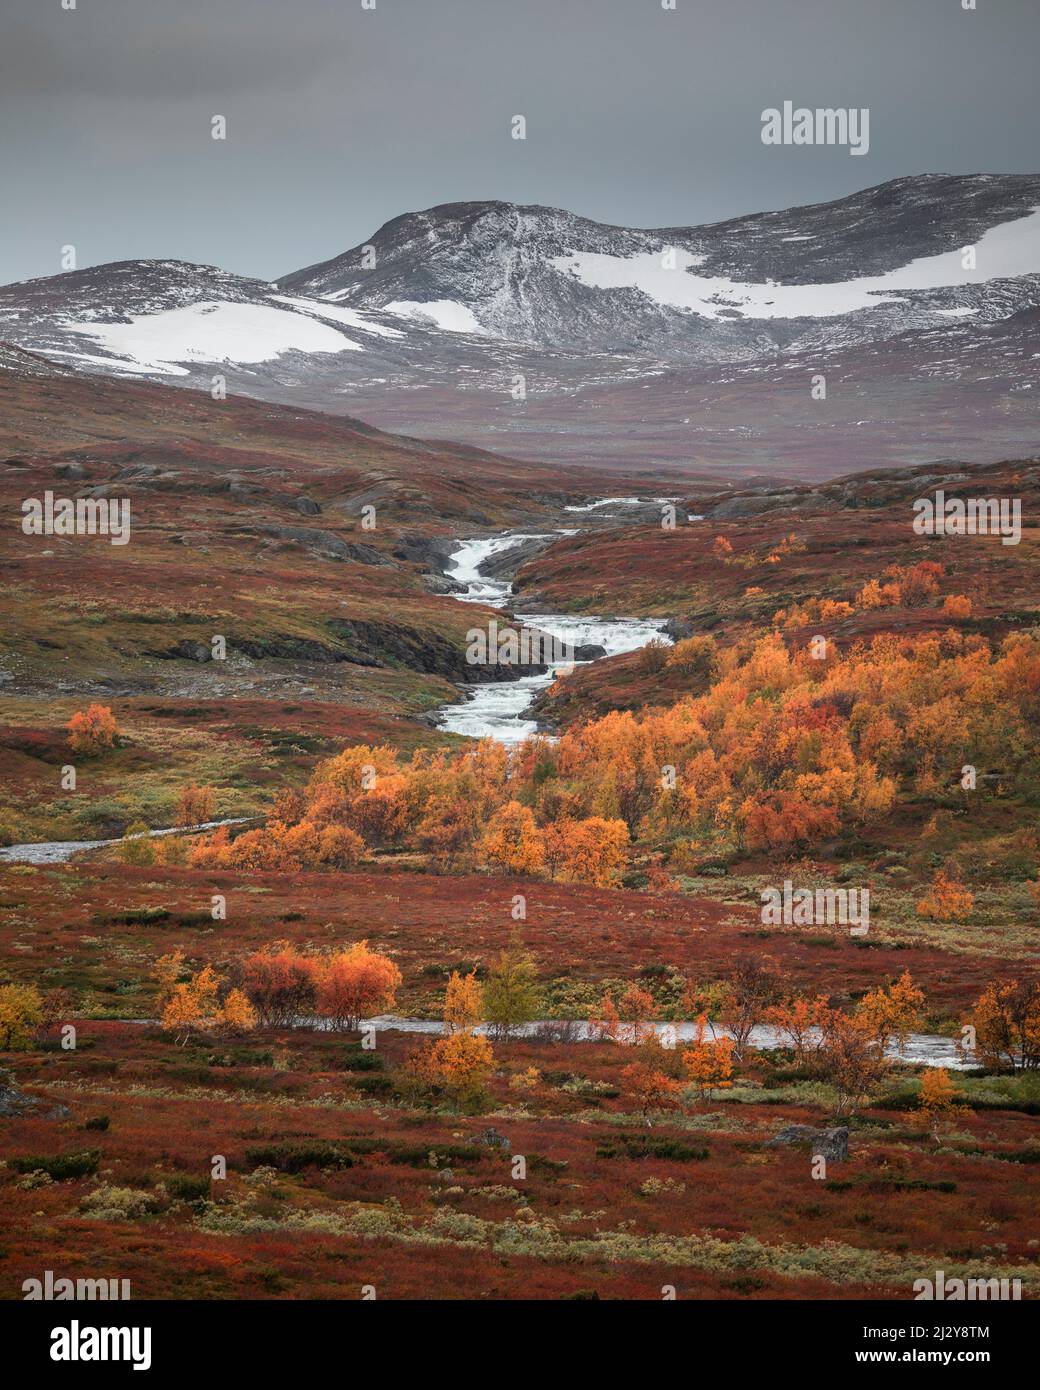 River with snowy mountains and trees in autumn along the Wilderness Road, on the Vildmarksvagen plateau in Jämtland in autumn in Sweden Stock Photo